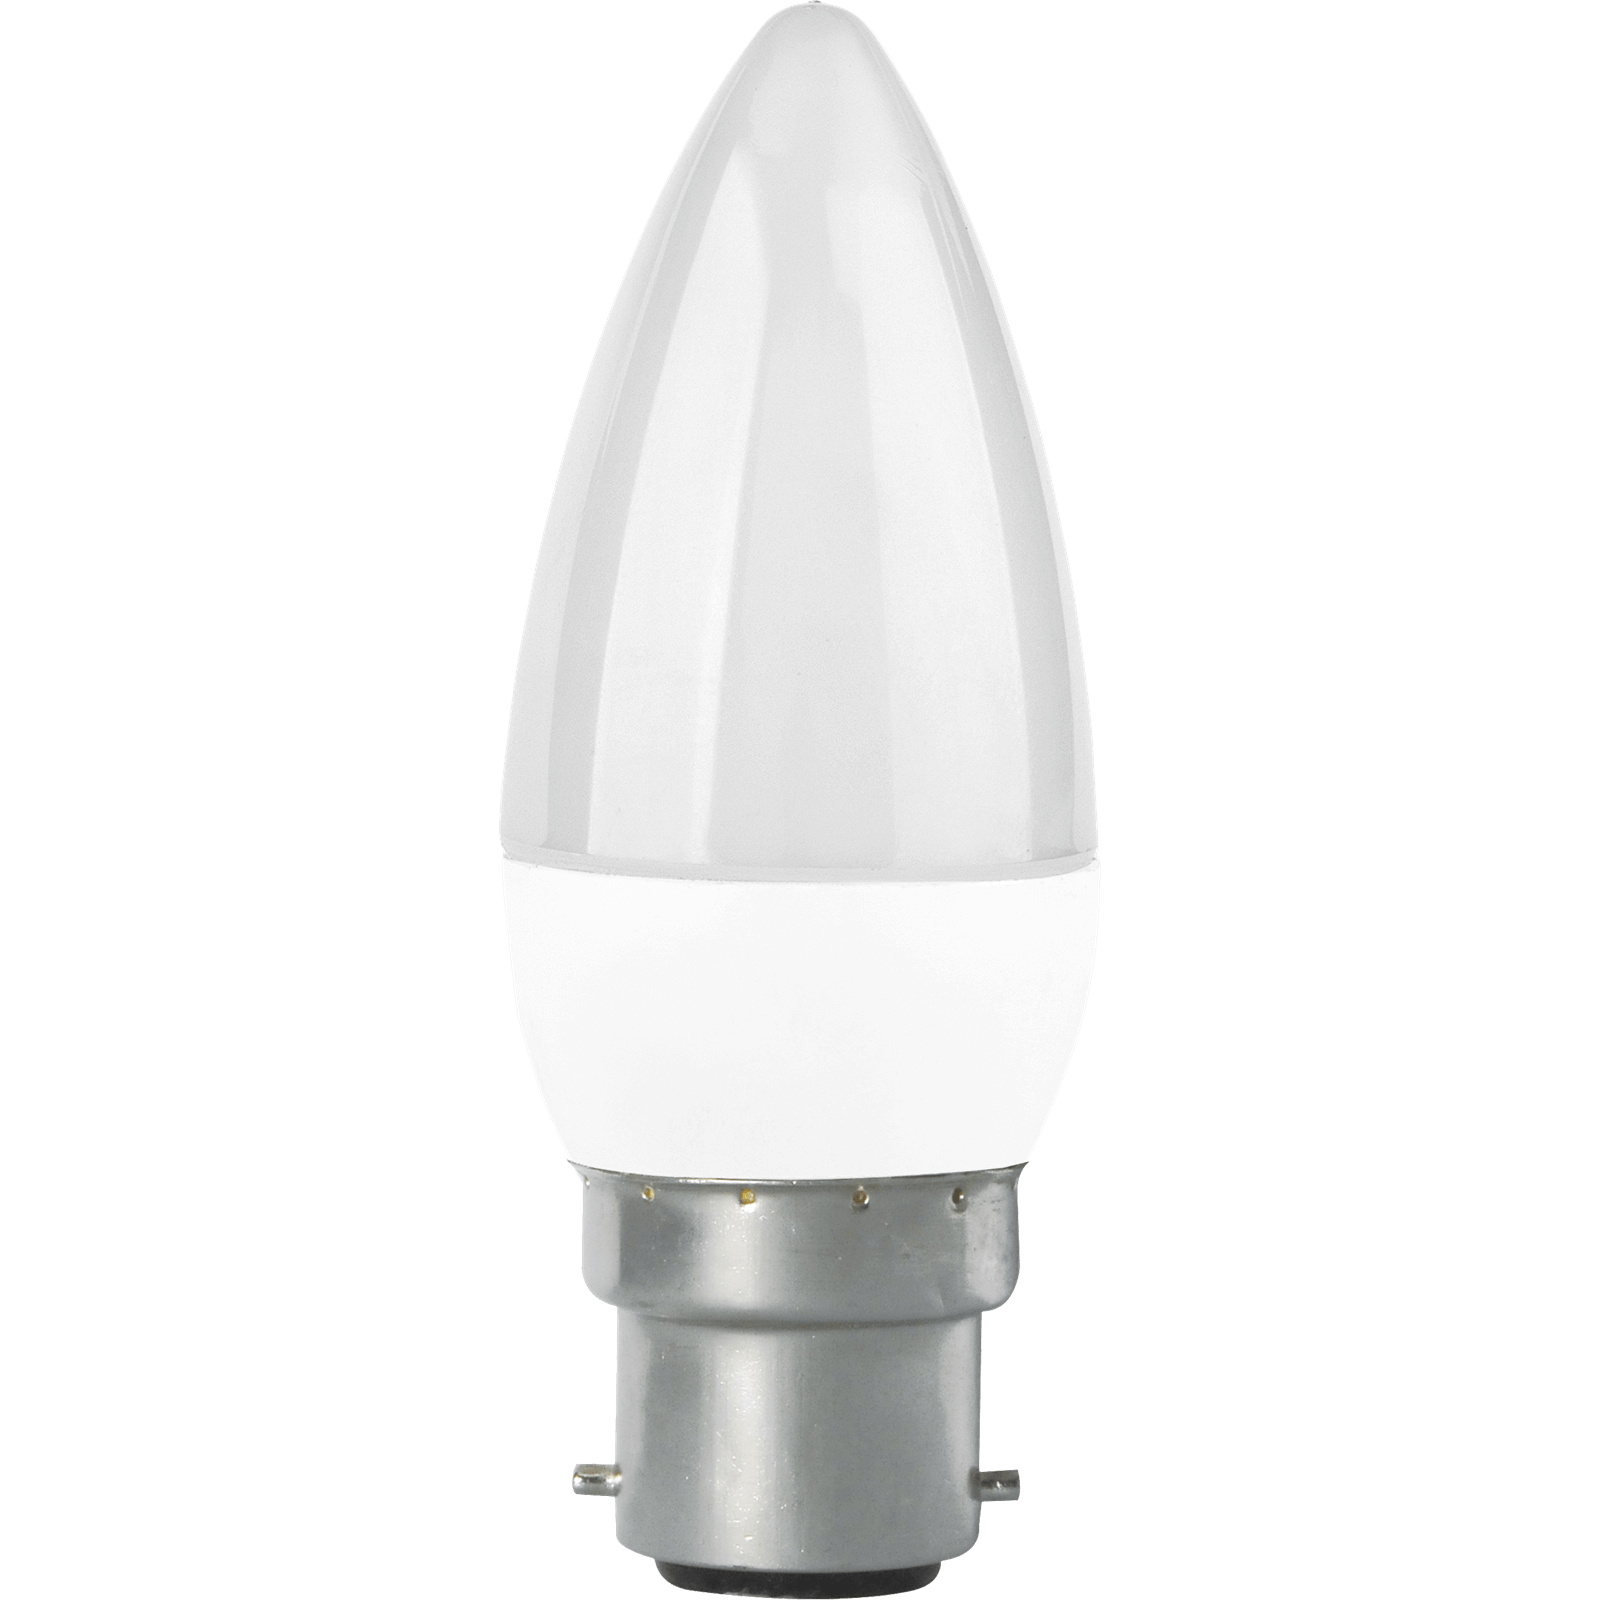 TCP LED Candle 25W BC Warm - 2 pack